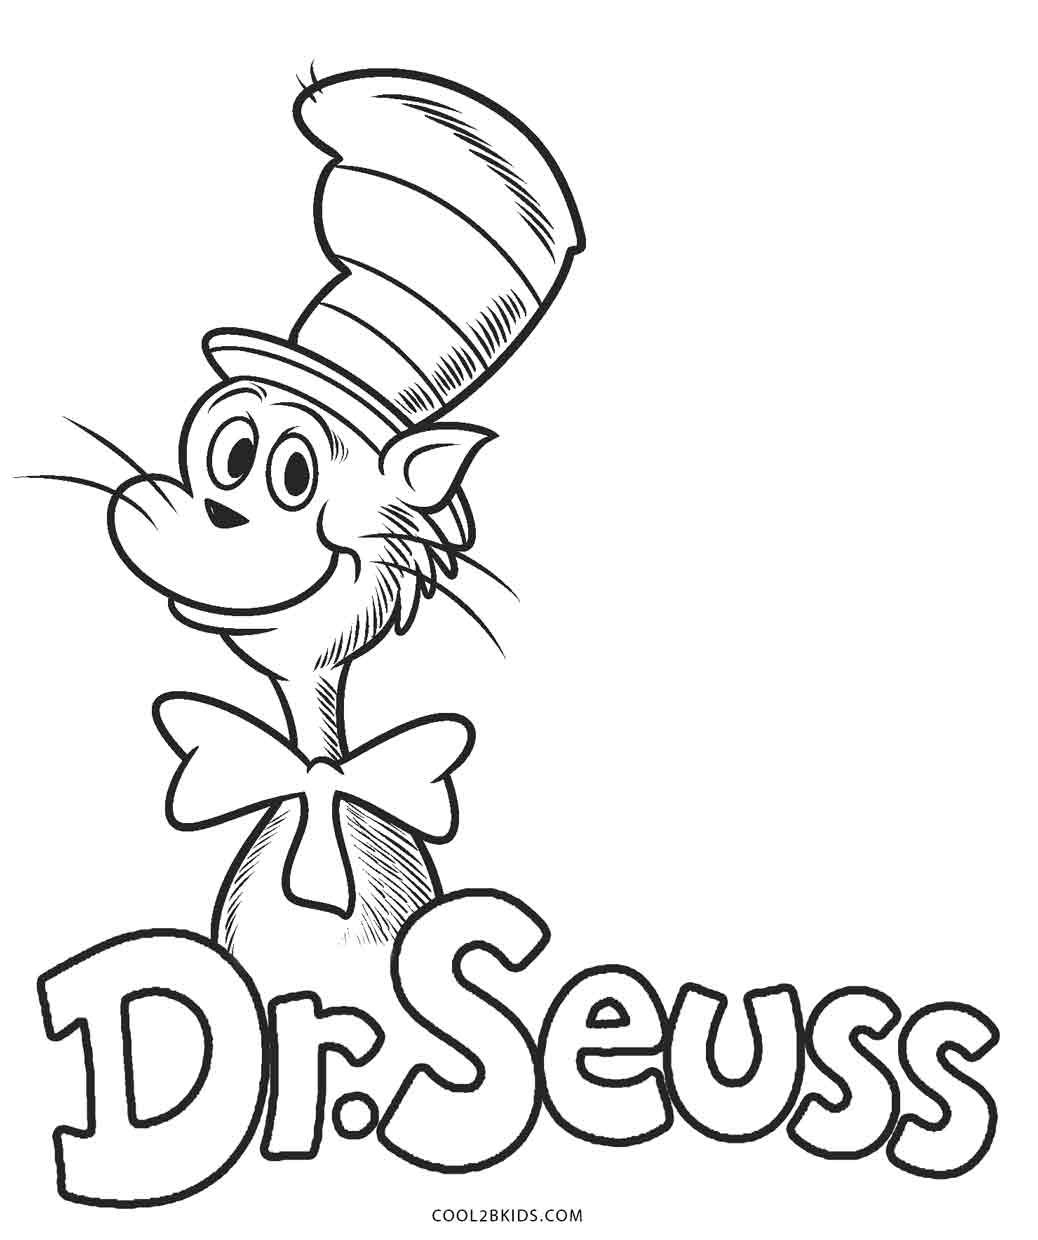 Free Printable Dr Seuss Coloring Pages For Kids | Cool2Bkids | School - Free Printable Dr Seuss Coloring Pages